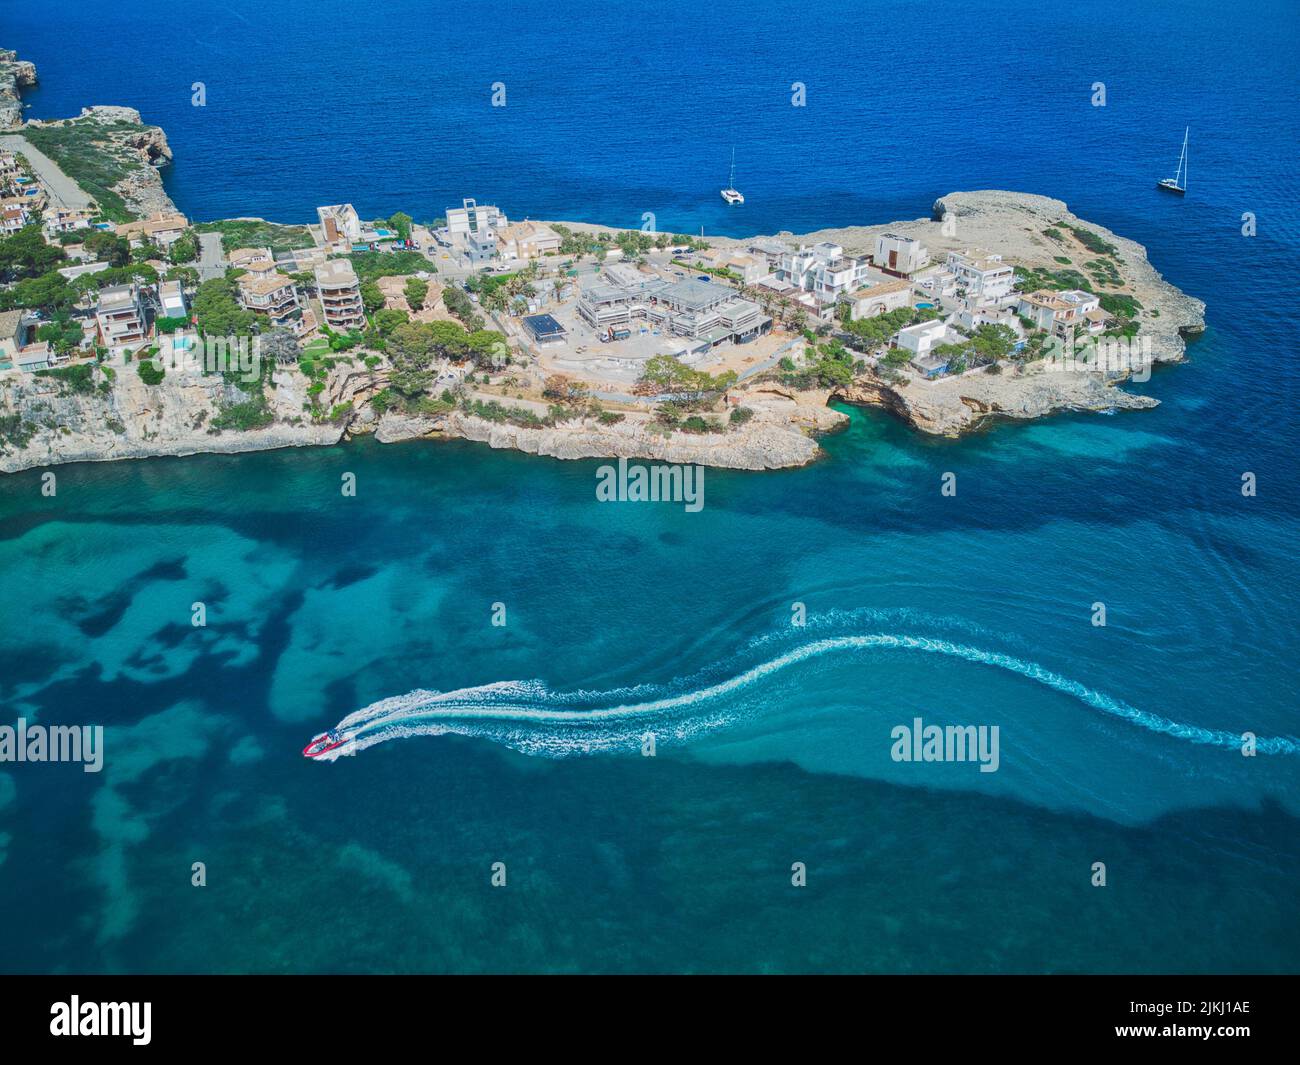 Spain, Balearic islands, Mallorca, district of Manacor, Portocristo. A motorboat enters the port leaving a trail on the sea Stock Photo